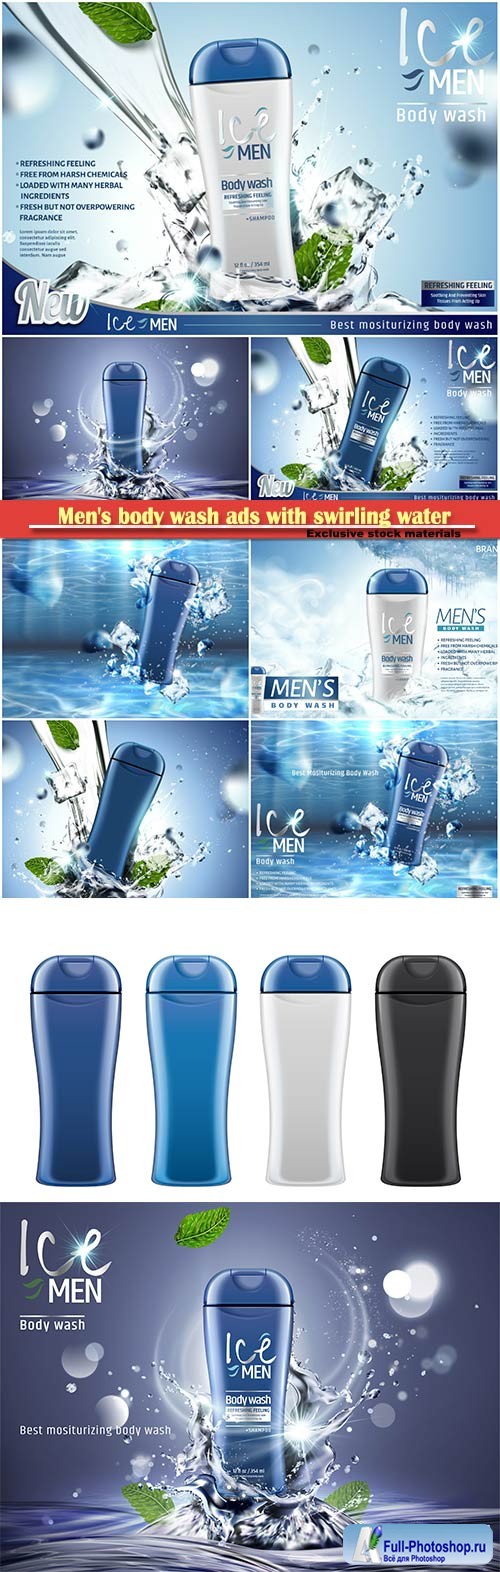 Men's body wash ads with swirling water in 3d vector illustration